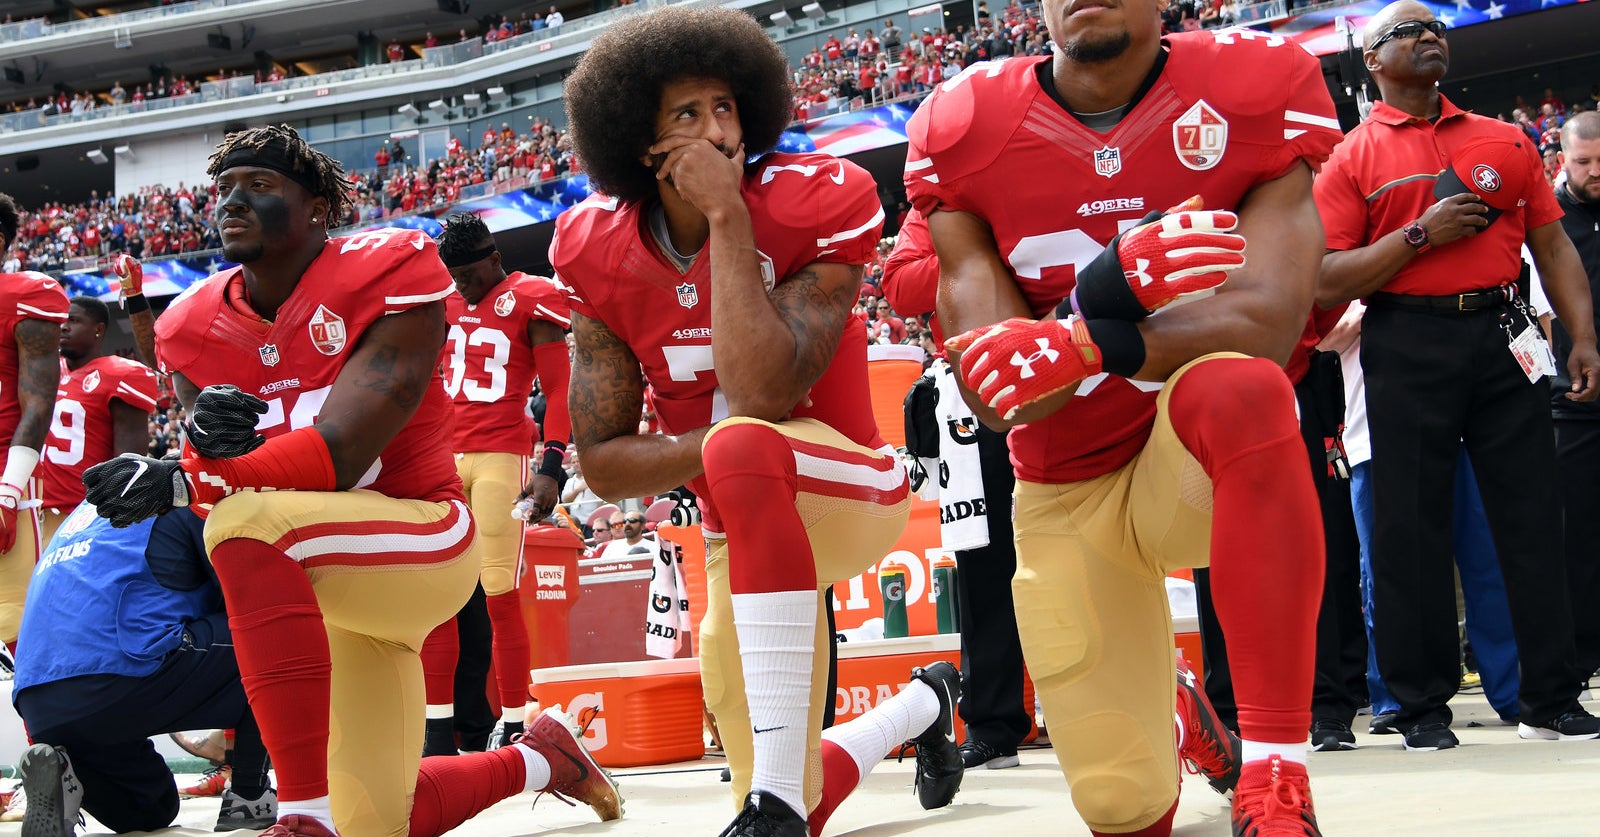 The Nfl Will Penalize Teams If Players Kneel During The